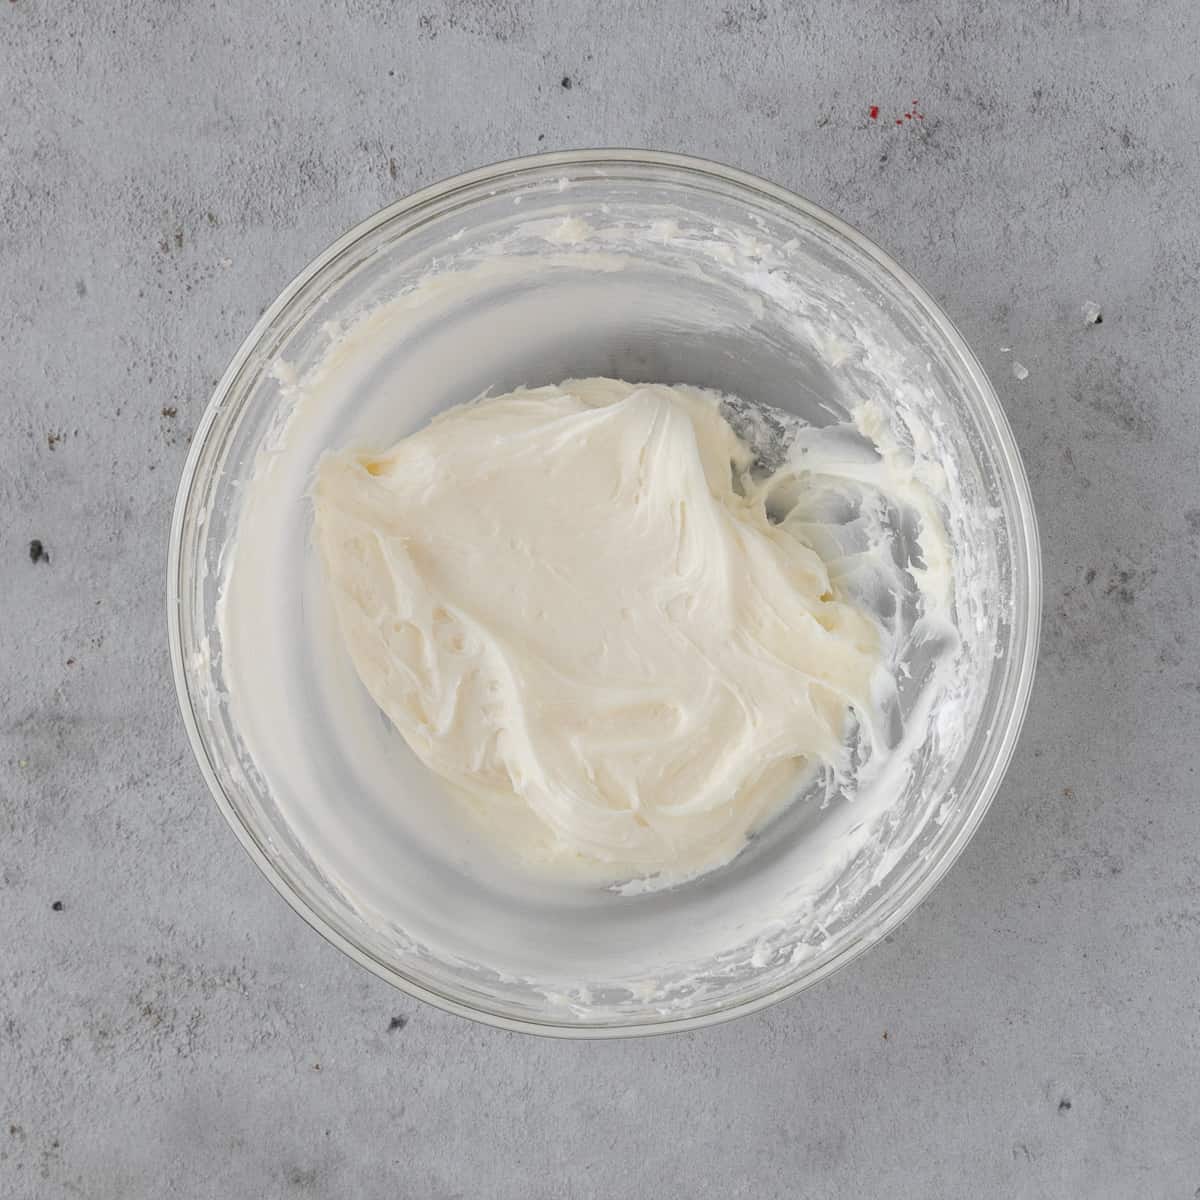 the cream cheese buttercream in a glass bowl on a grey background